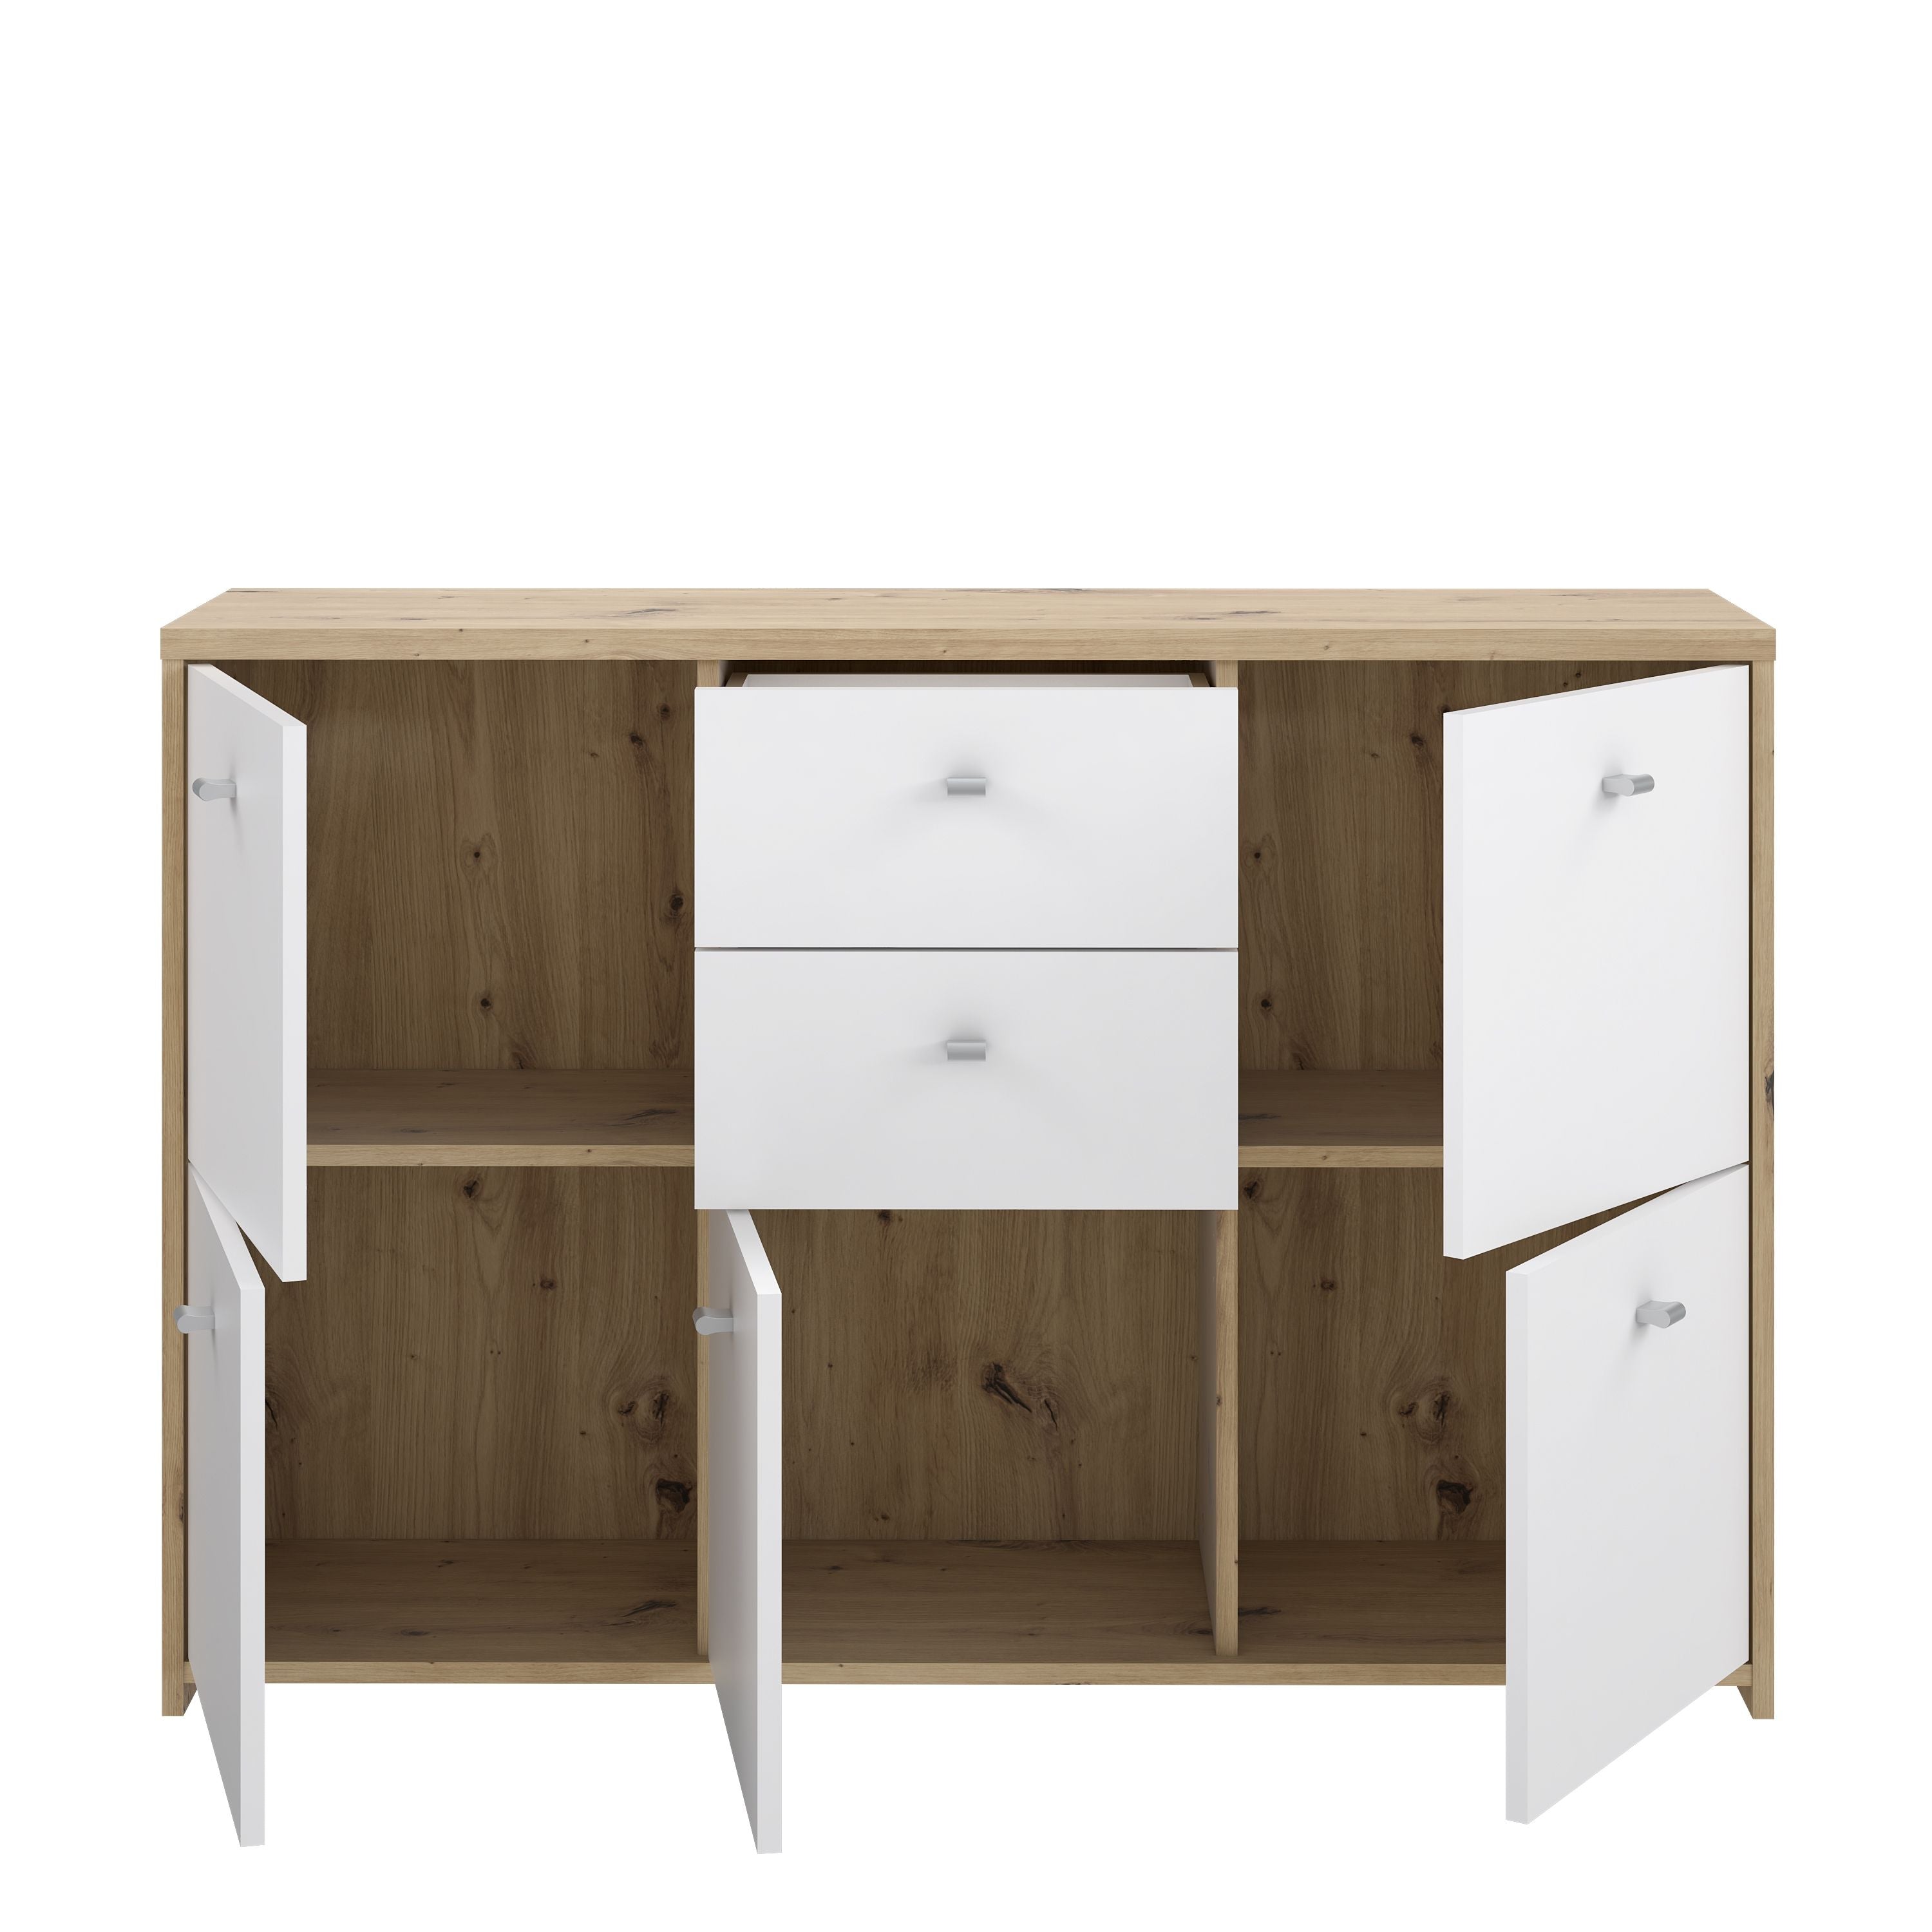 Best Chest Storage Cabinet with 2 Drawers and 5 Doors in Artisan Oak/White Furniture To Go Ltd